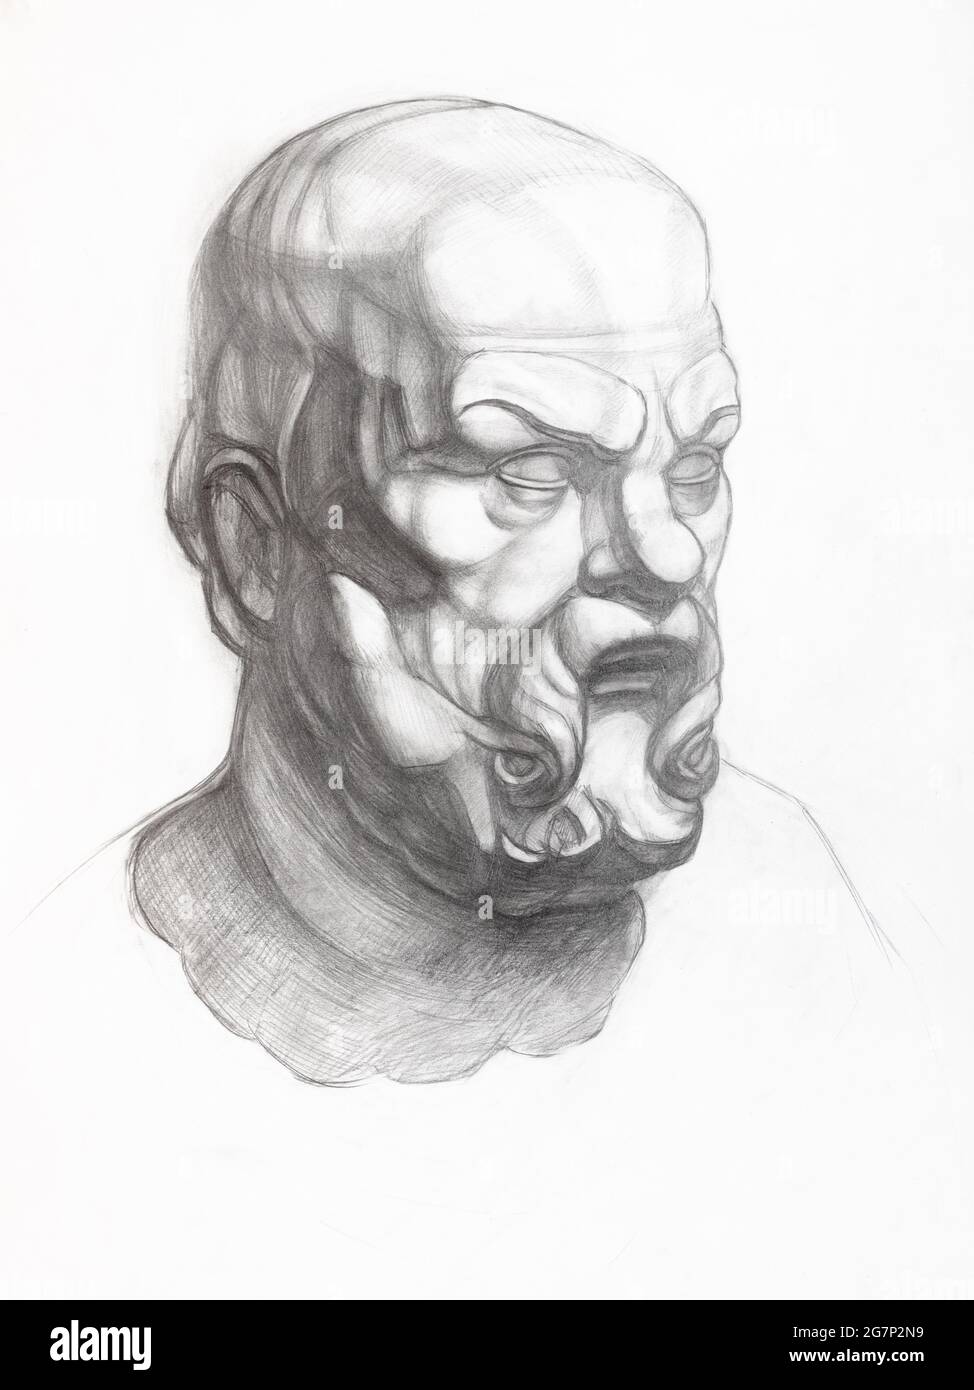 academic drawing - sketch of plaster cast of Socrates head hand-drawn ...